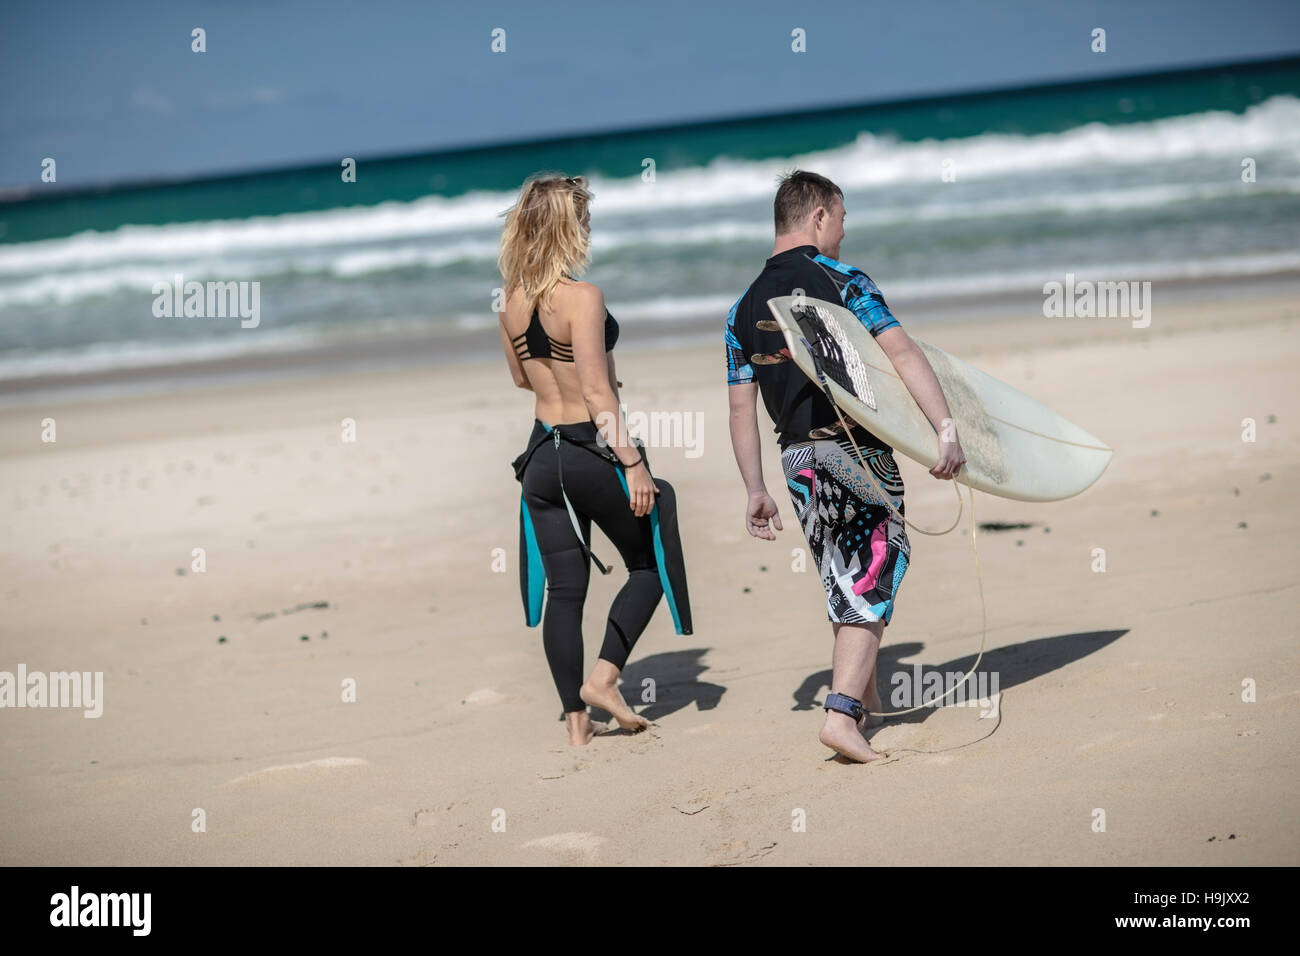 Teenage boy with down syndrome and woman with surfboard on beach Stock Photo